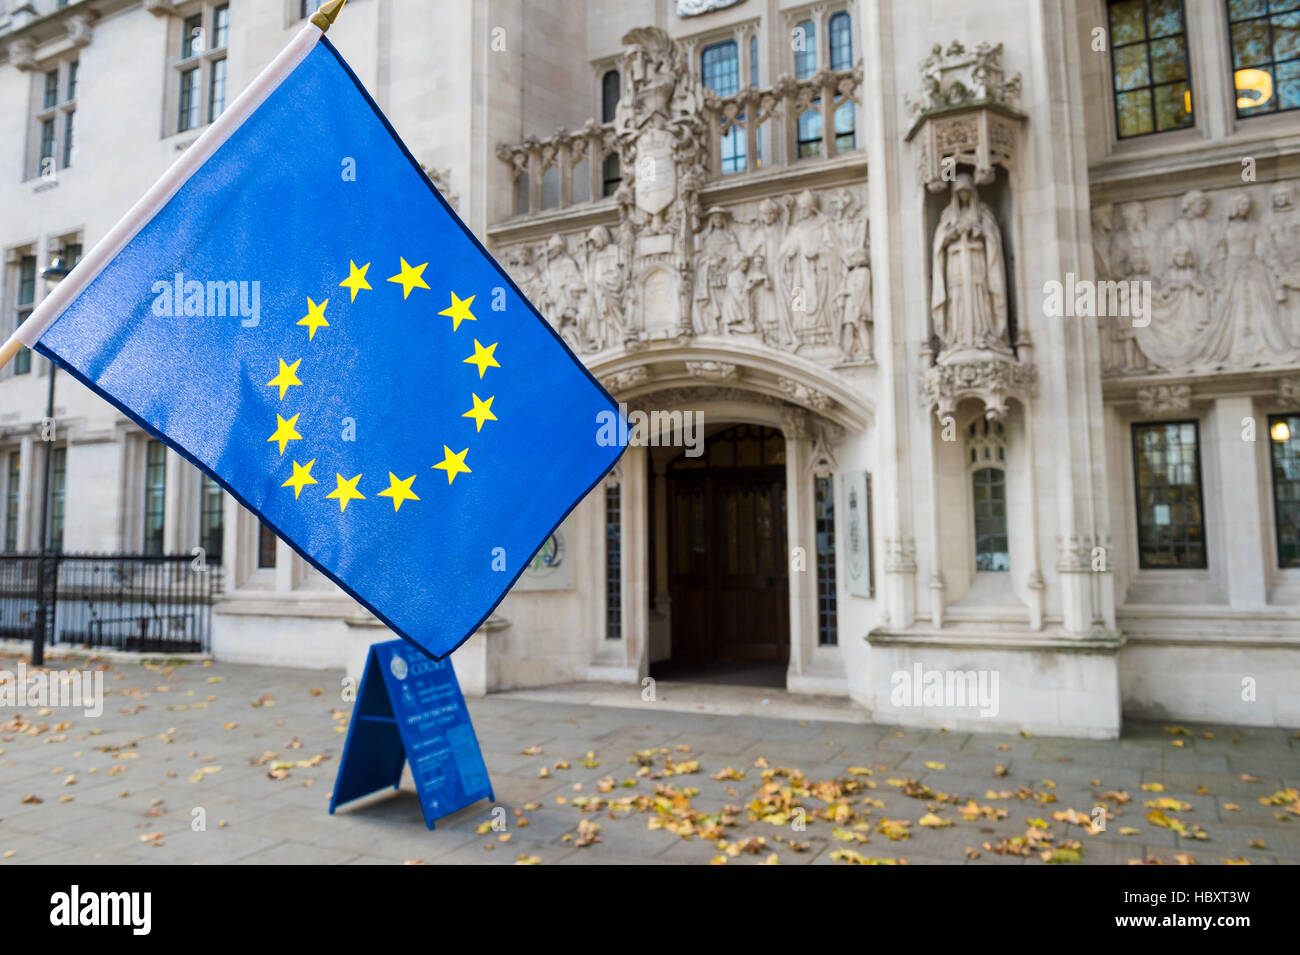 European Union flag flying in front of The Supreme Court of the United Kingdom in the public Middlesex Guildhall building Stock Photo